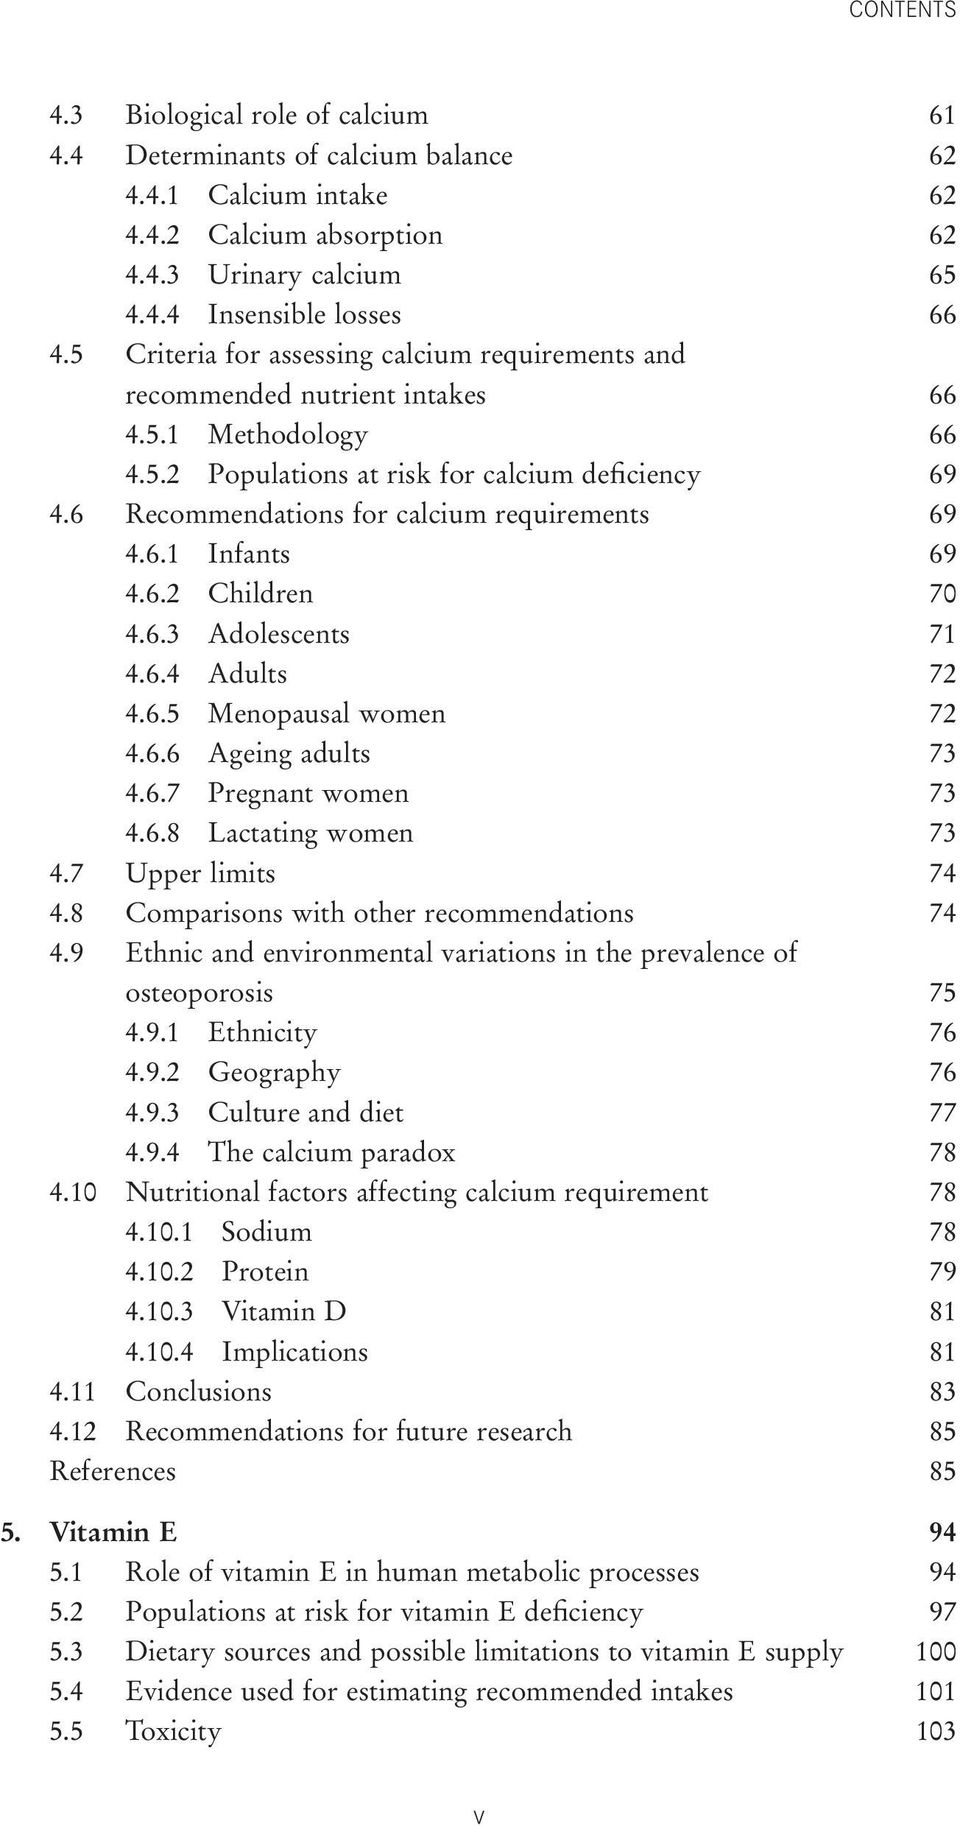 6 Recommendations for calcium requirements 69 4.6.1 Infants 69 4.6.2 Children 70 4.6.3 Adolescents 71 4.6.4 Adults 72 4.6.5 Menopausal women 72 4.6.6 Ageing adults 73 4.6.7 Pregnant women 73 4.6.8 Lactating women 73 4.